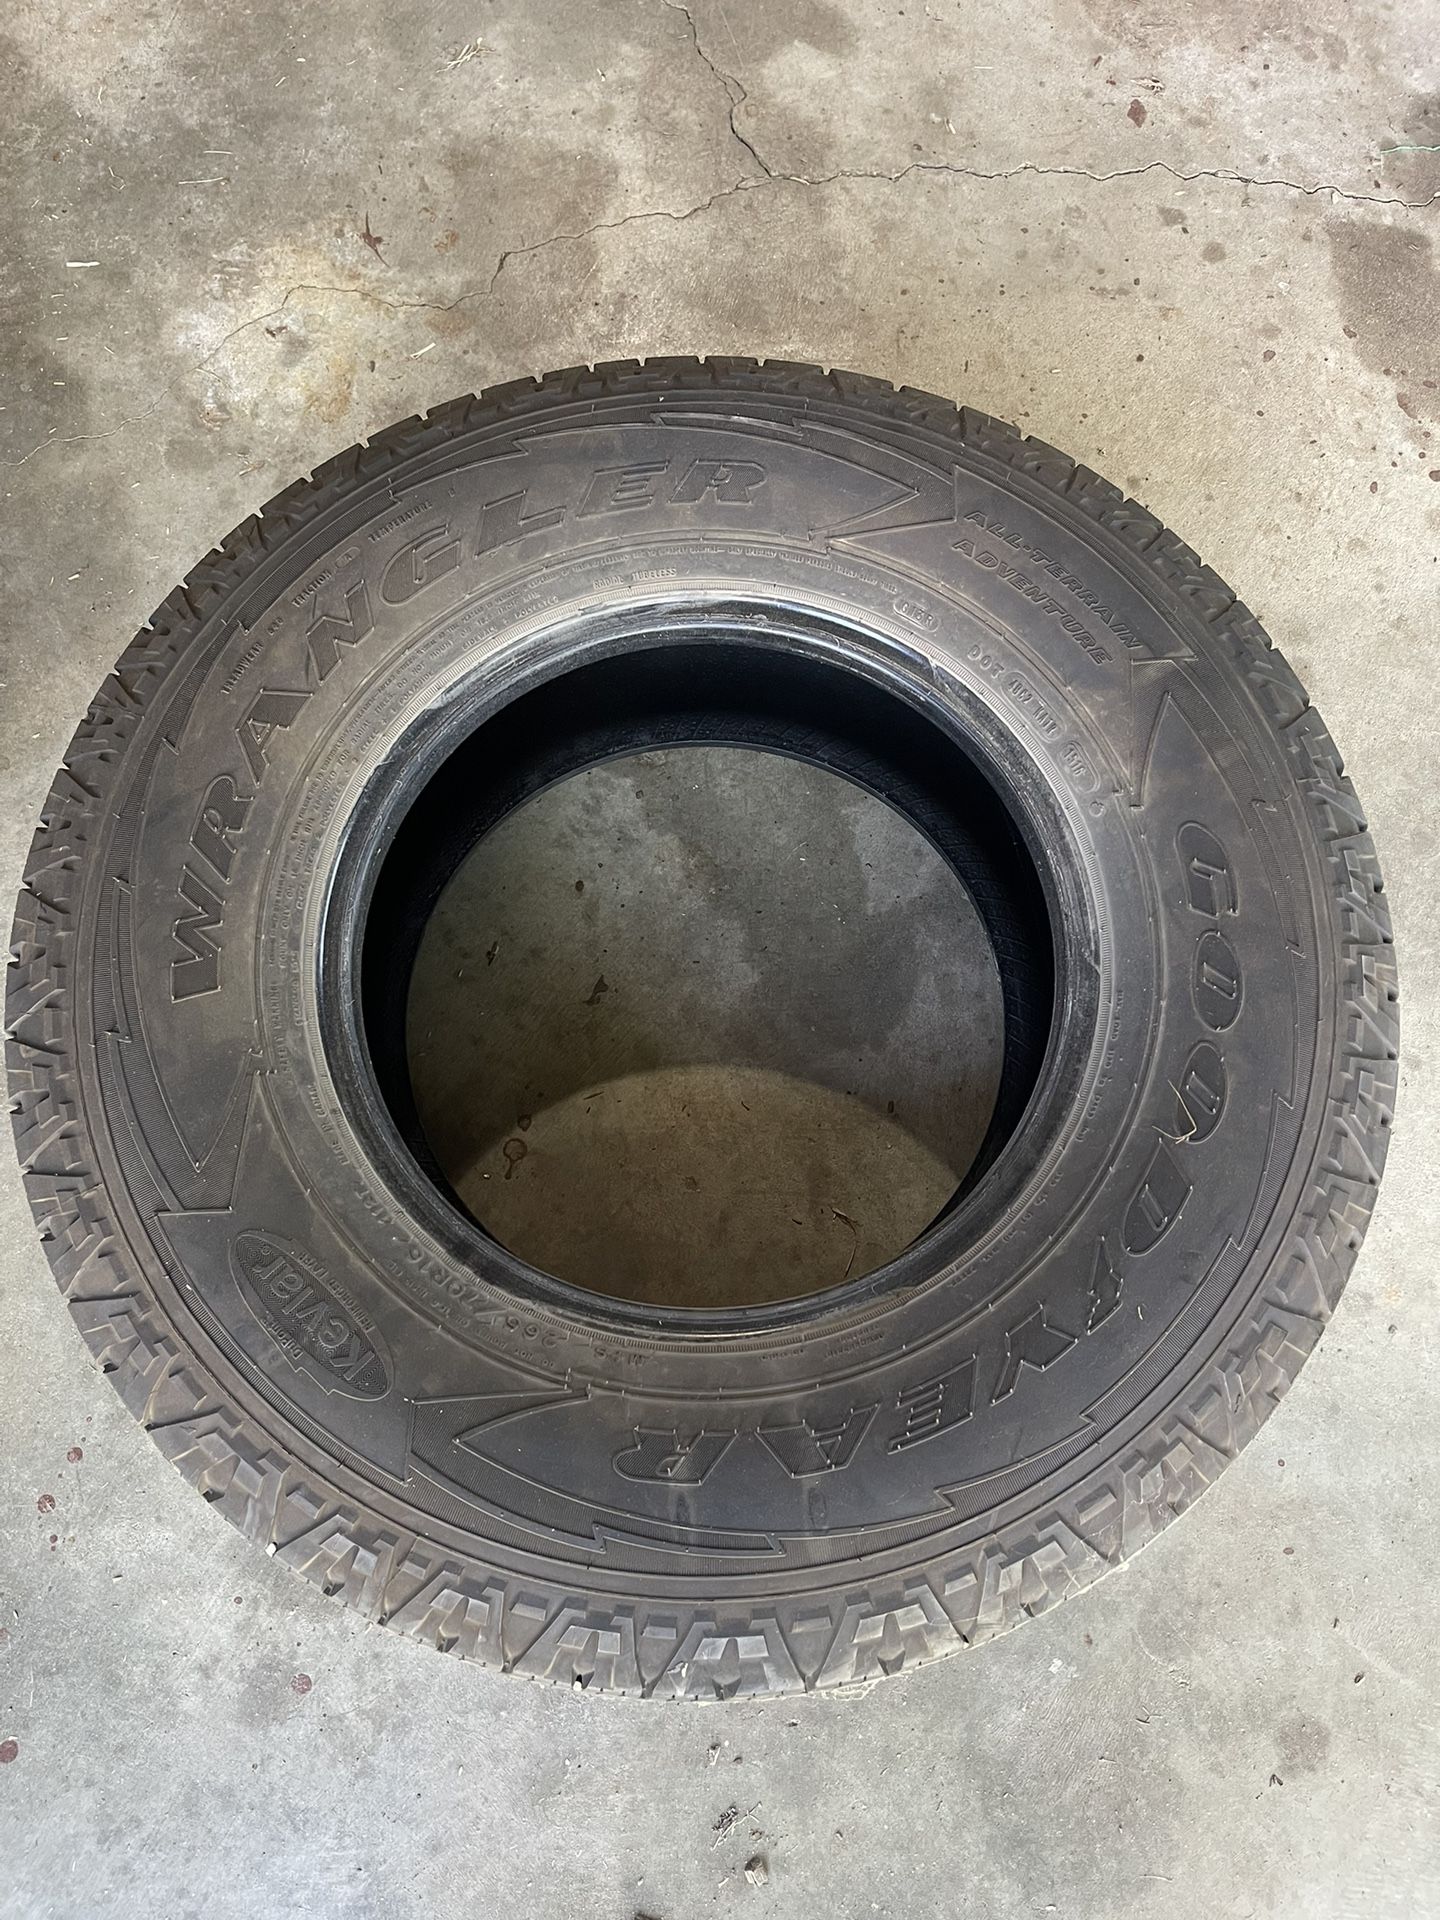 TOYOTA 3rd Gen Tacoma Stock Spare Tire